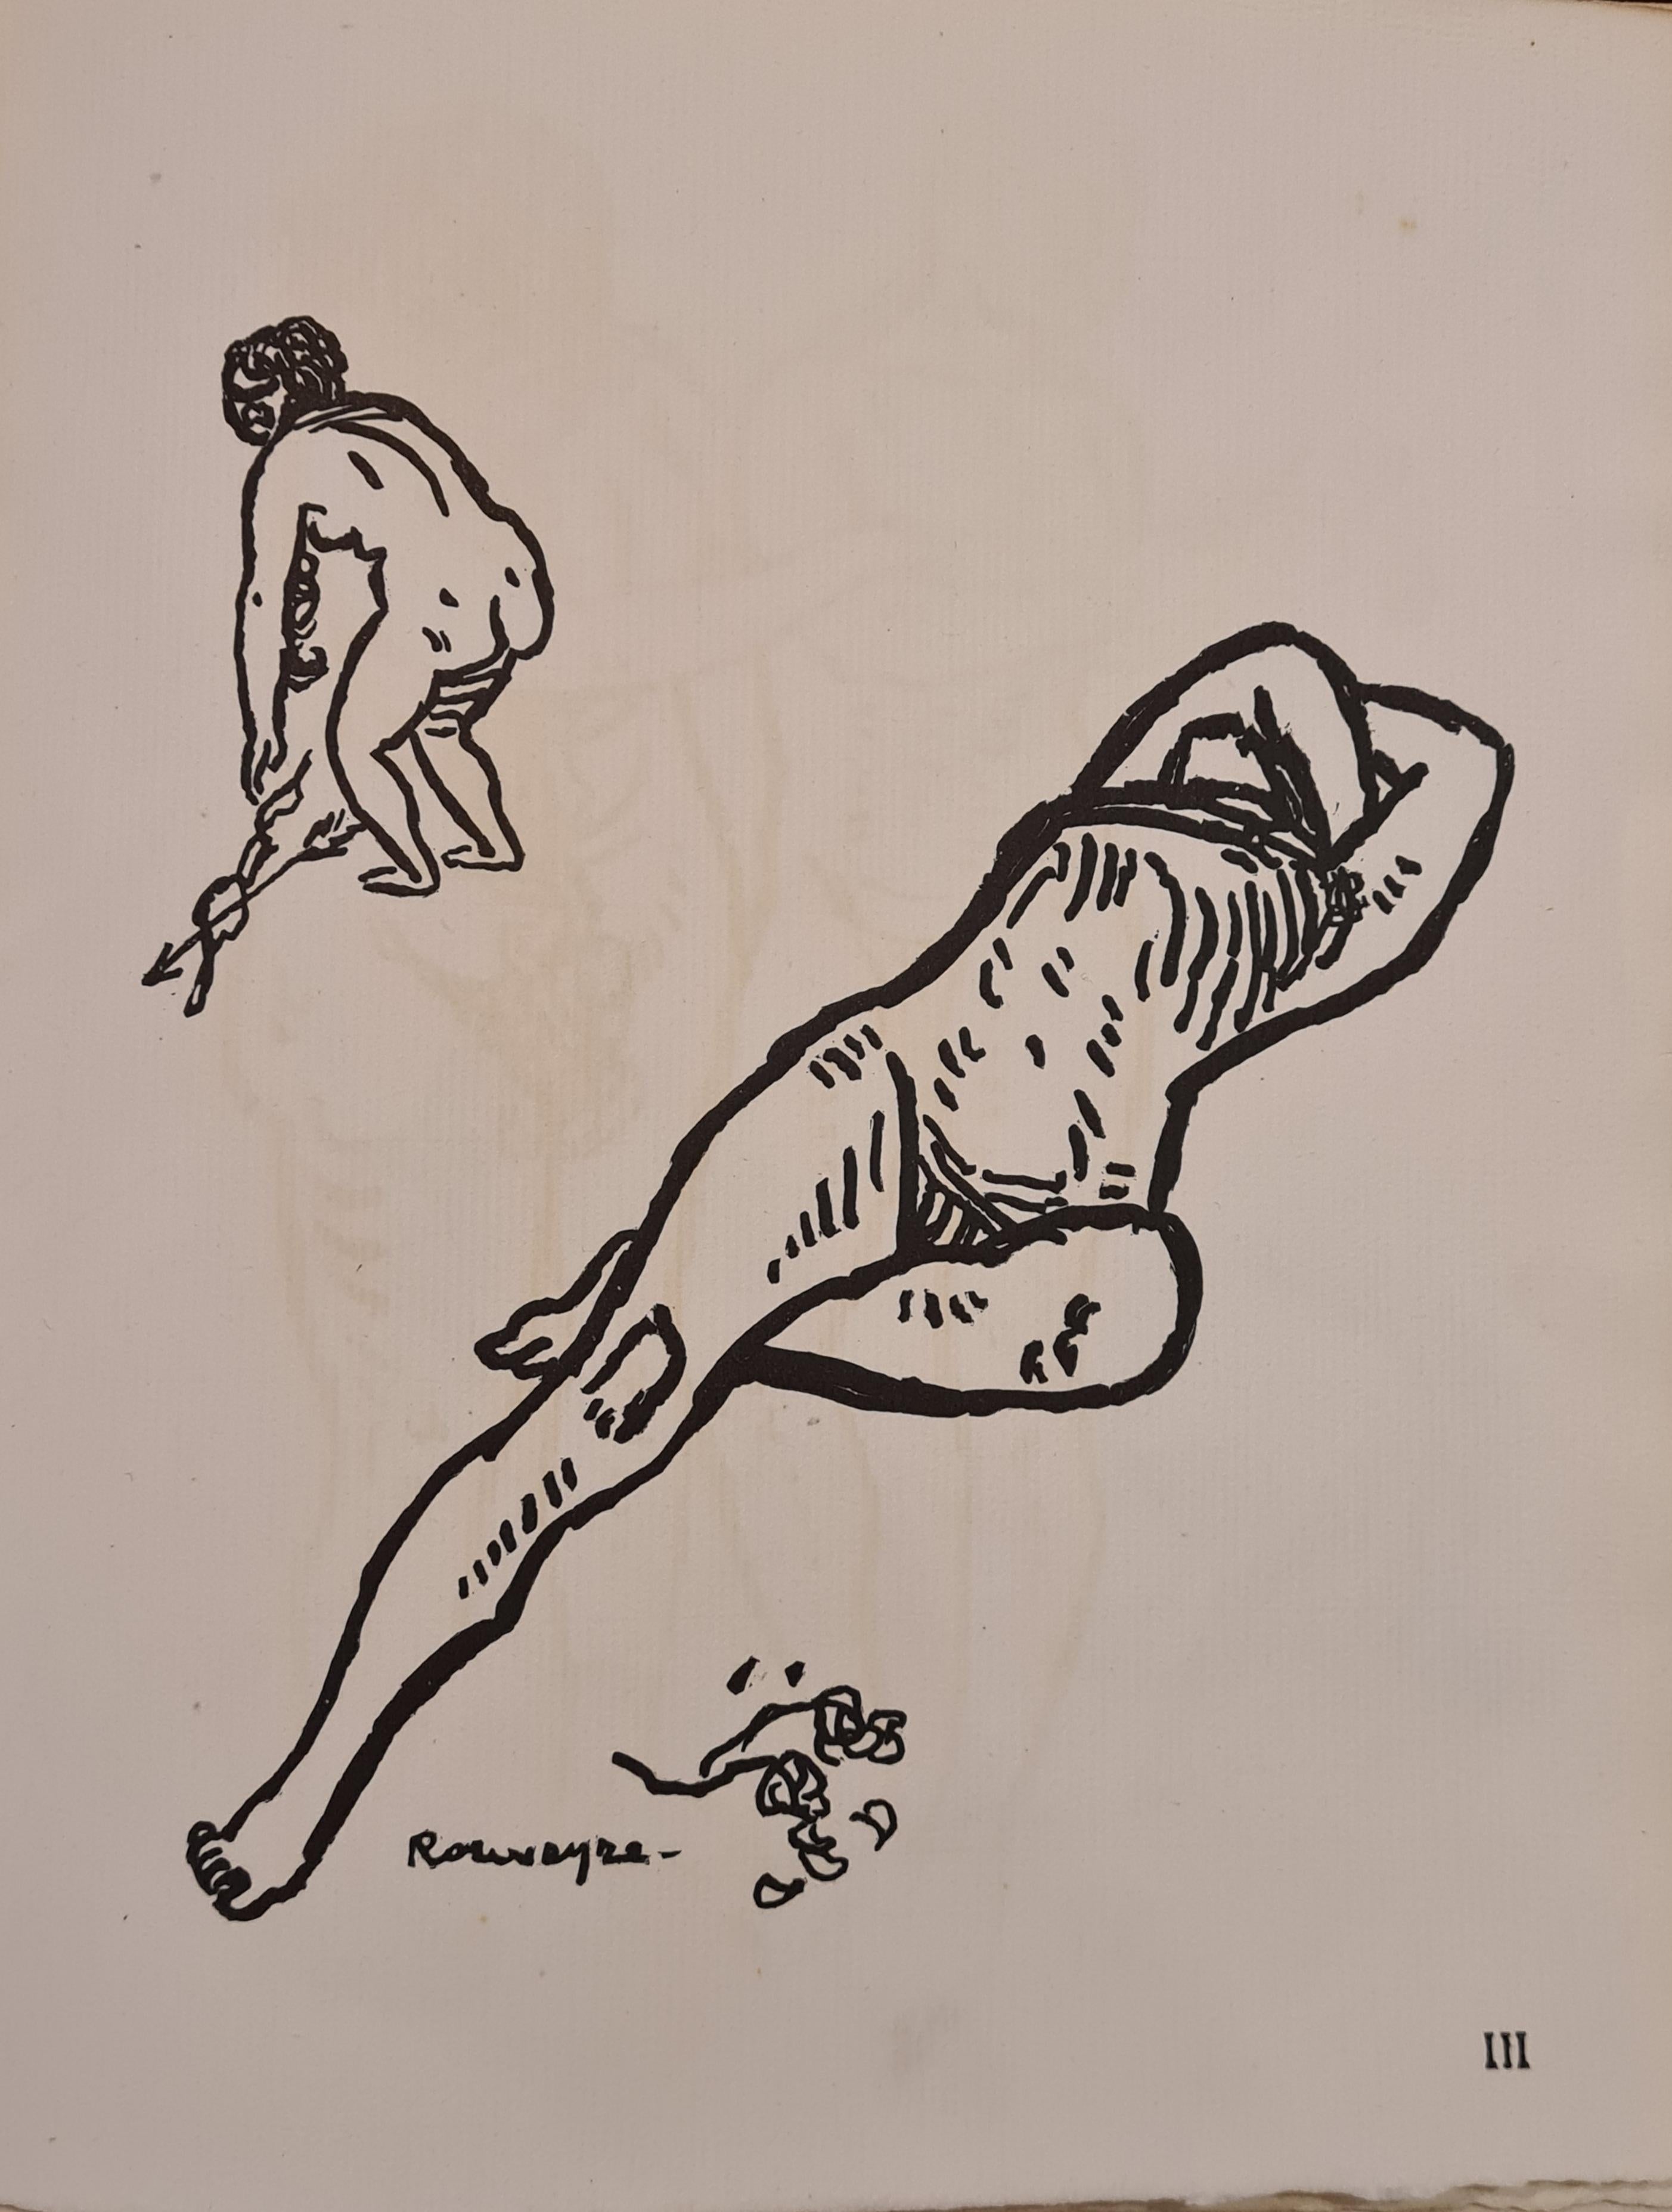 Mort de l'Amour, Series of 8 Erotic Limited-Edition Wood Engravings. - Other Art Style Print by André Rouveyre